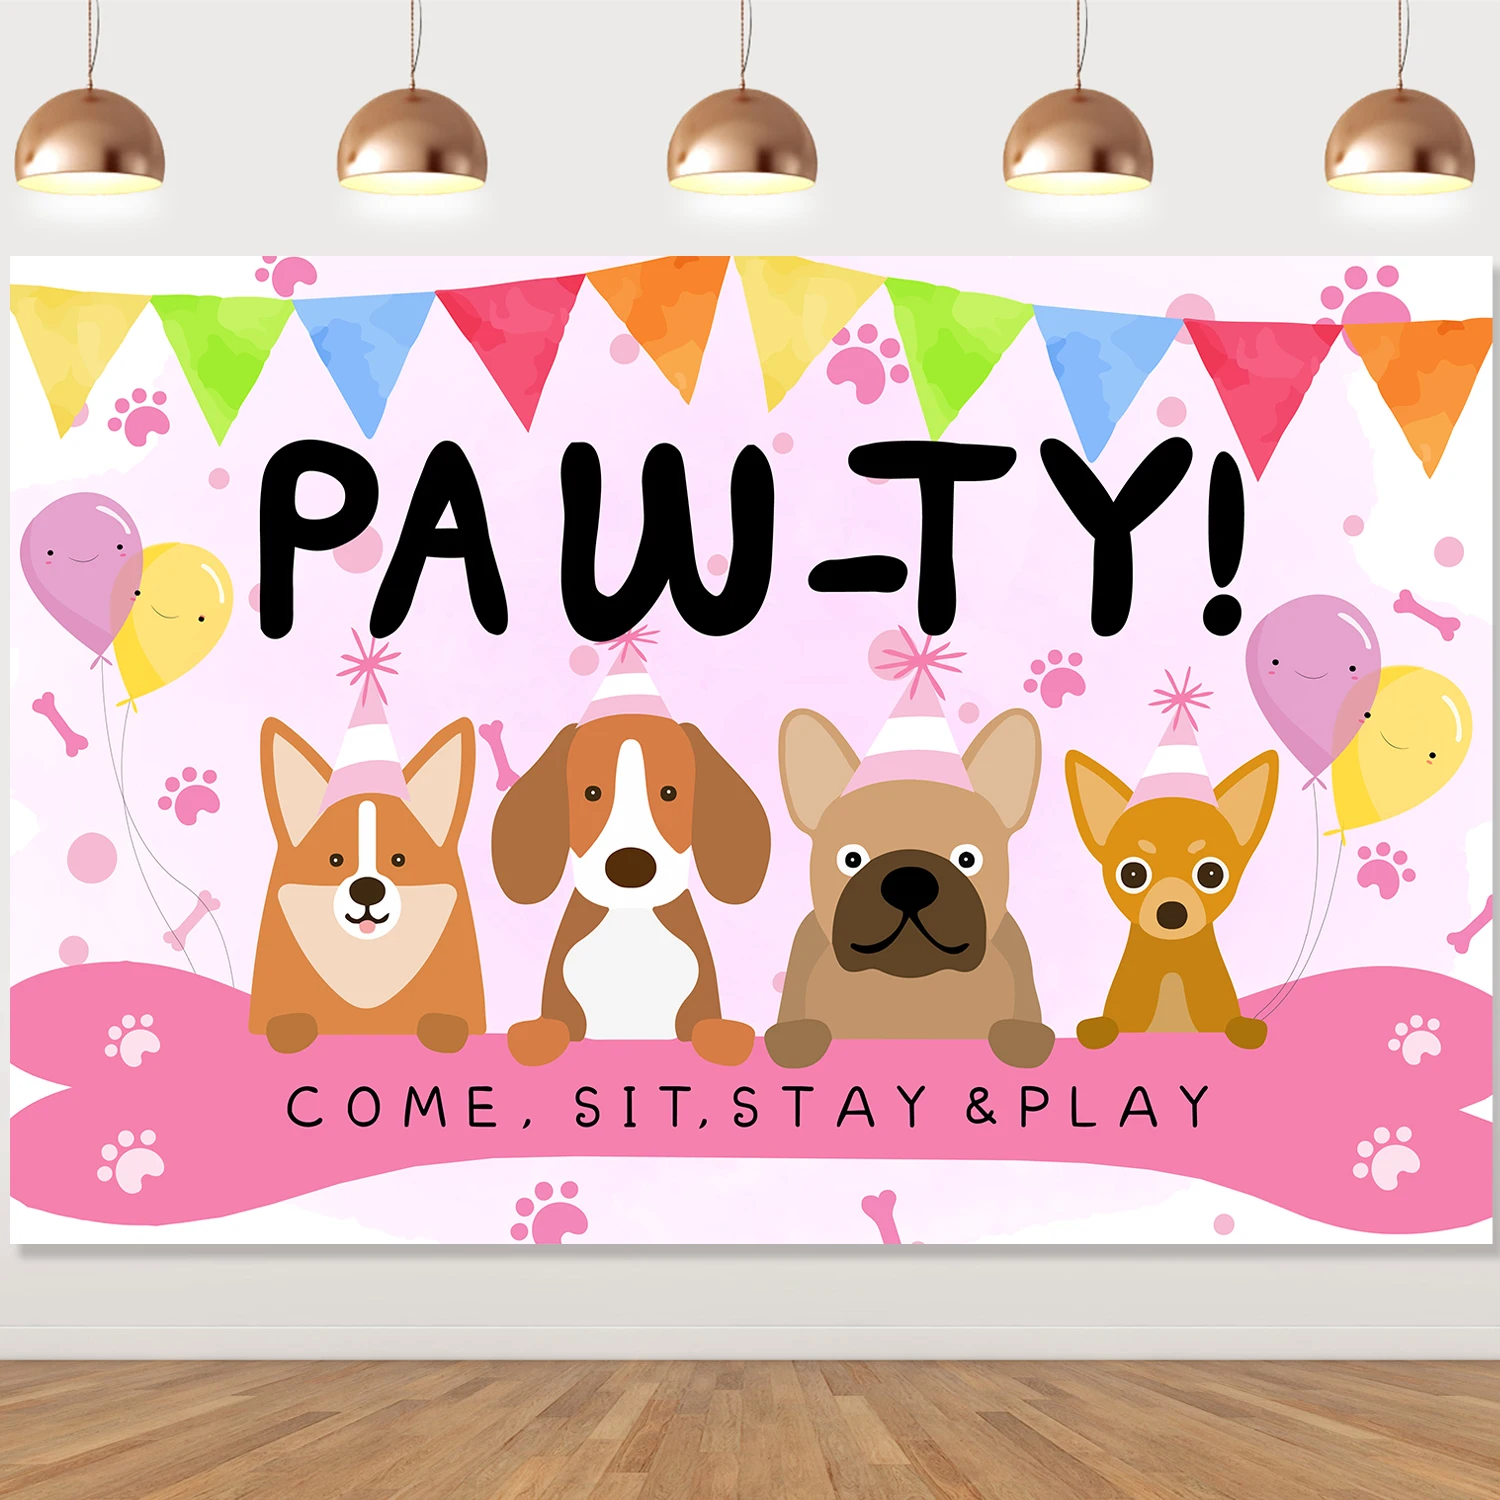 

Let's Paw-Cartoon Dog Backdrop, Puppy, Shiba Inu Banner, Balloon, Birthday Hat, Photography Background Decoration